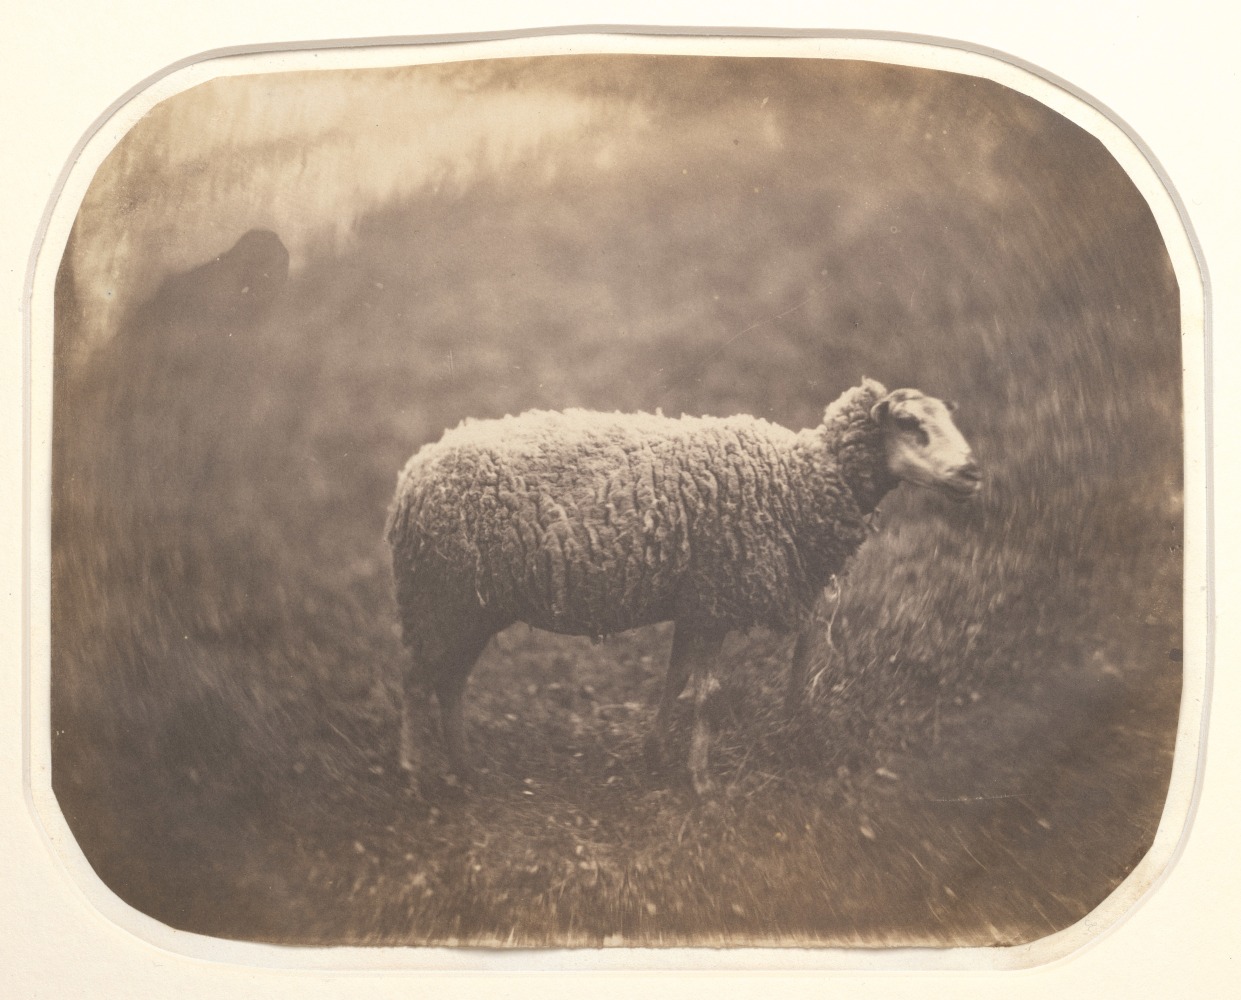 Attributed to Count Olympe AGUADO (French, 1827–1895) Study of a sheep, circa 1855 Salt print from a collodion negative 13.5 x 17.2 cm, corners rounded, irregularly trimmed